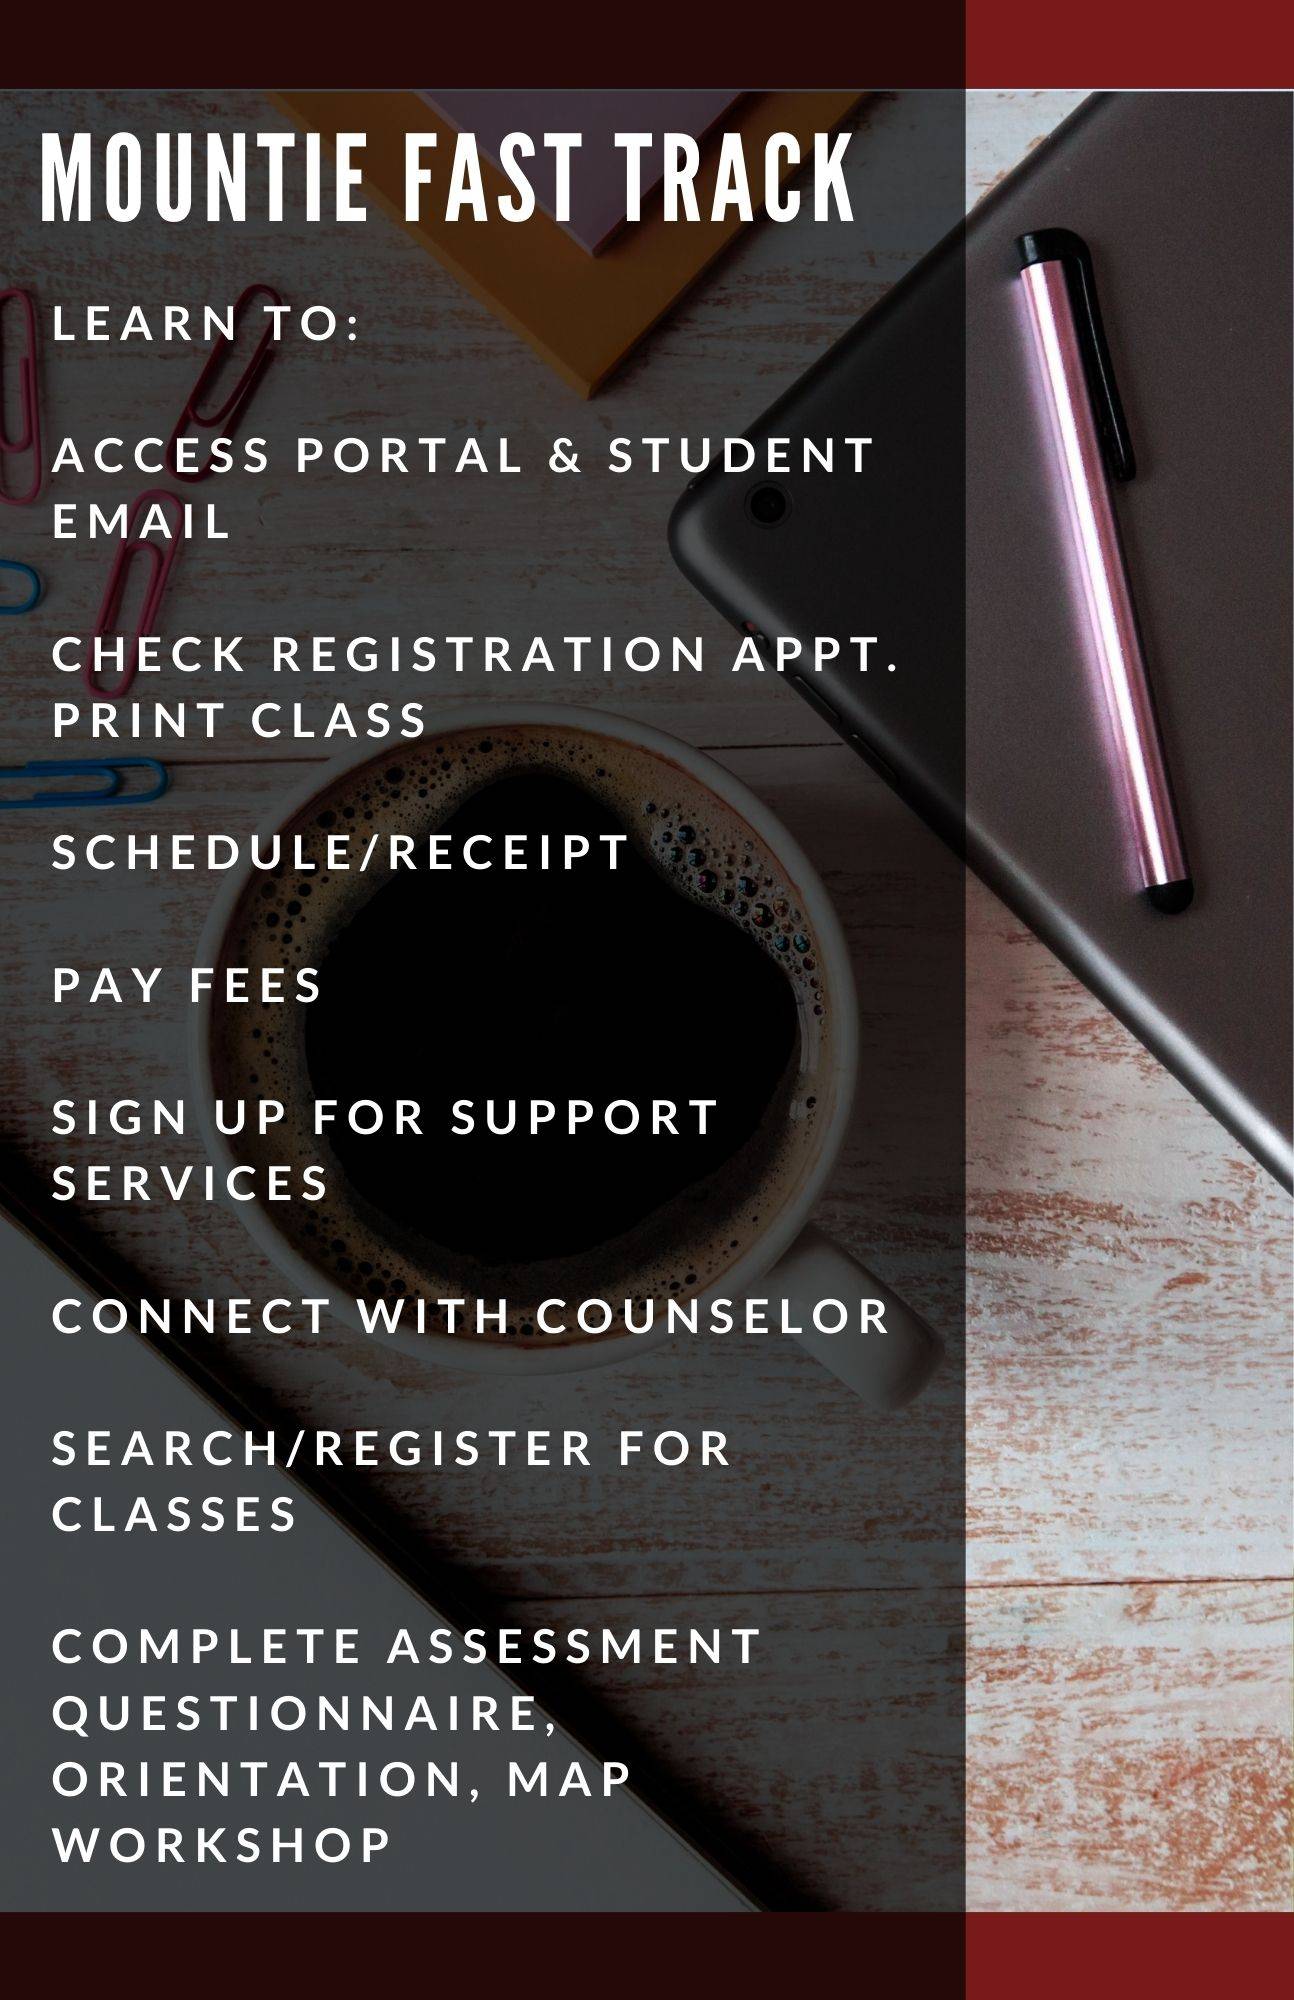 Learn to:  Access portal & student email  check registration appt. print class   schedule/receipt  pay fees  sign up for support services  connect with counselor  search/register for classes  complete assessment questionnaire, orientation, MAP workshop